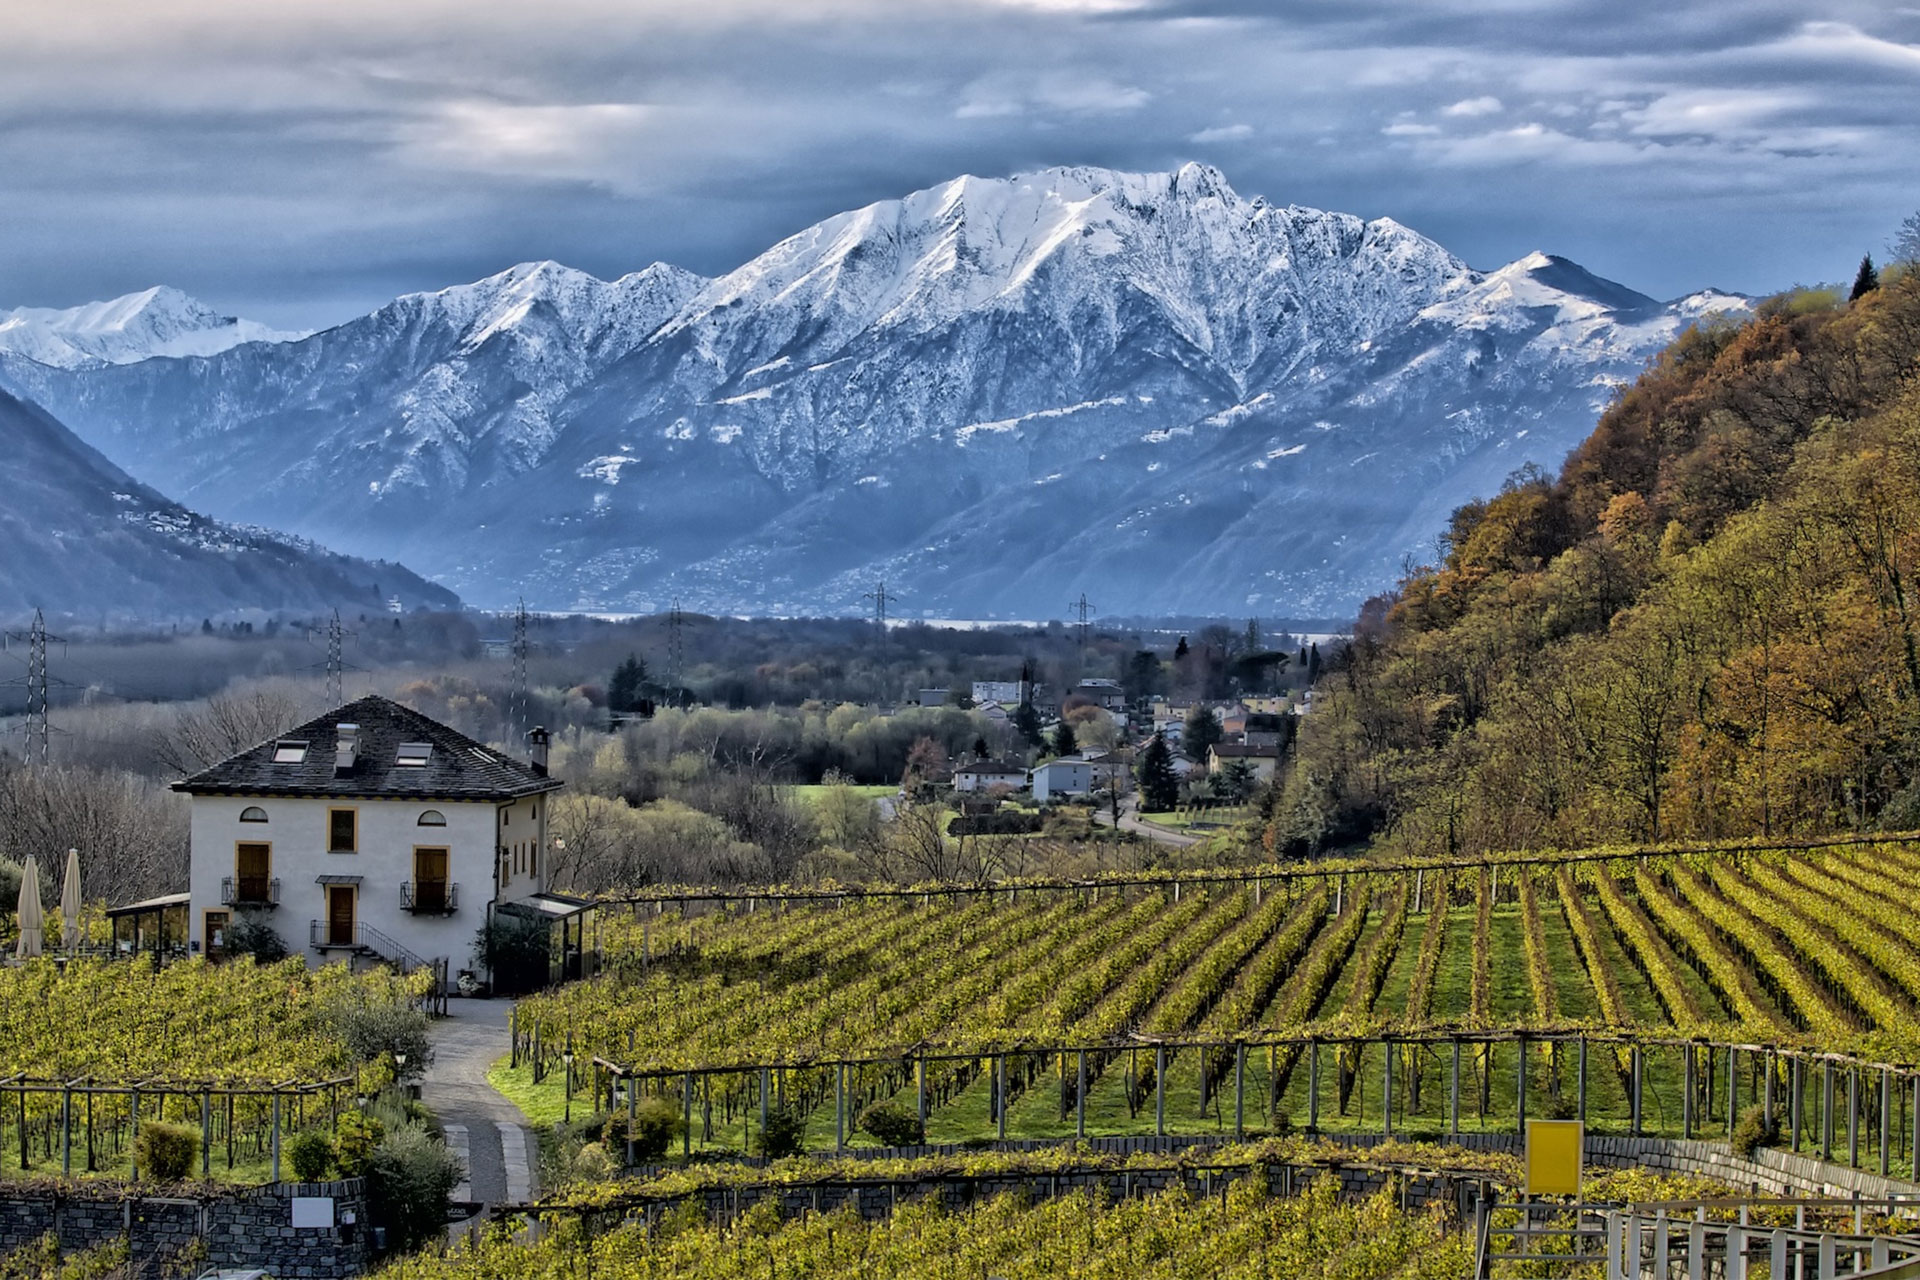 Swiss Vineyards, white gold amid the mountains